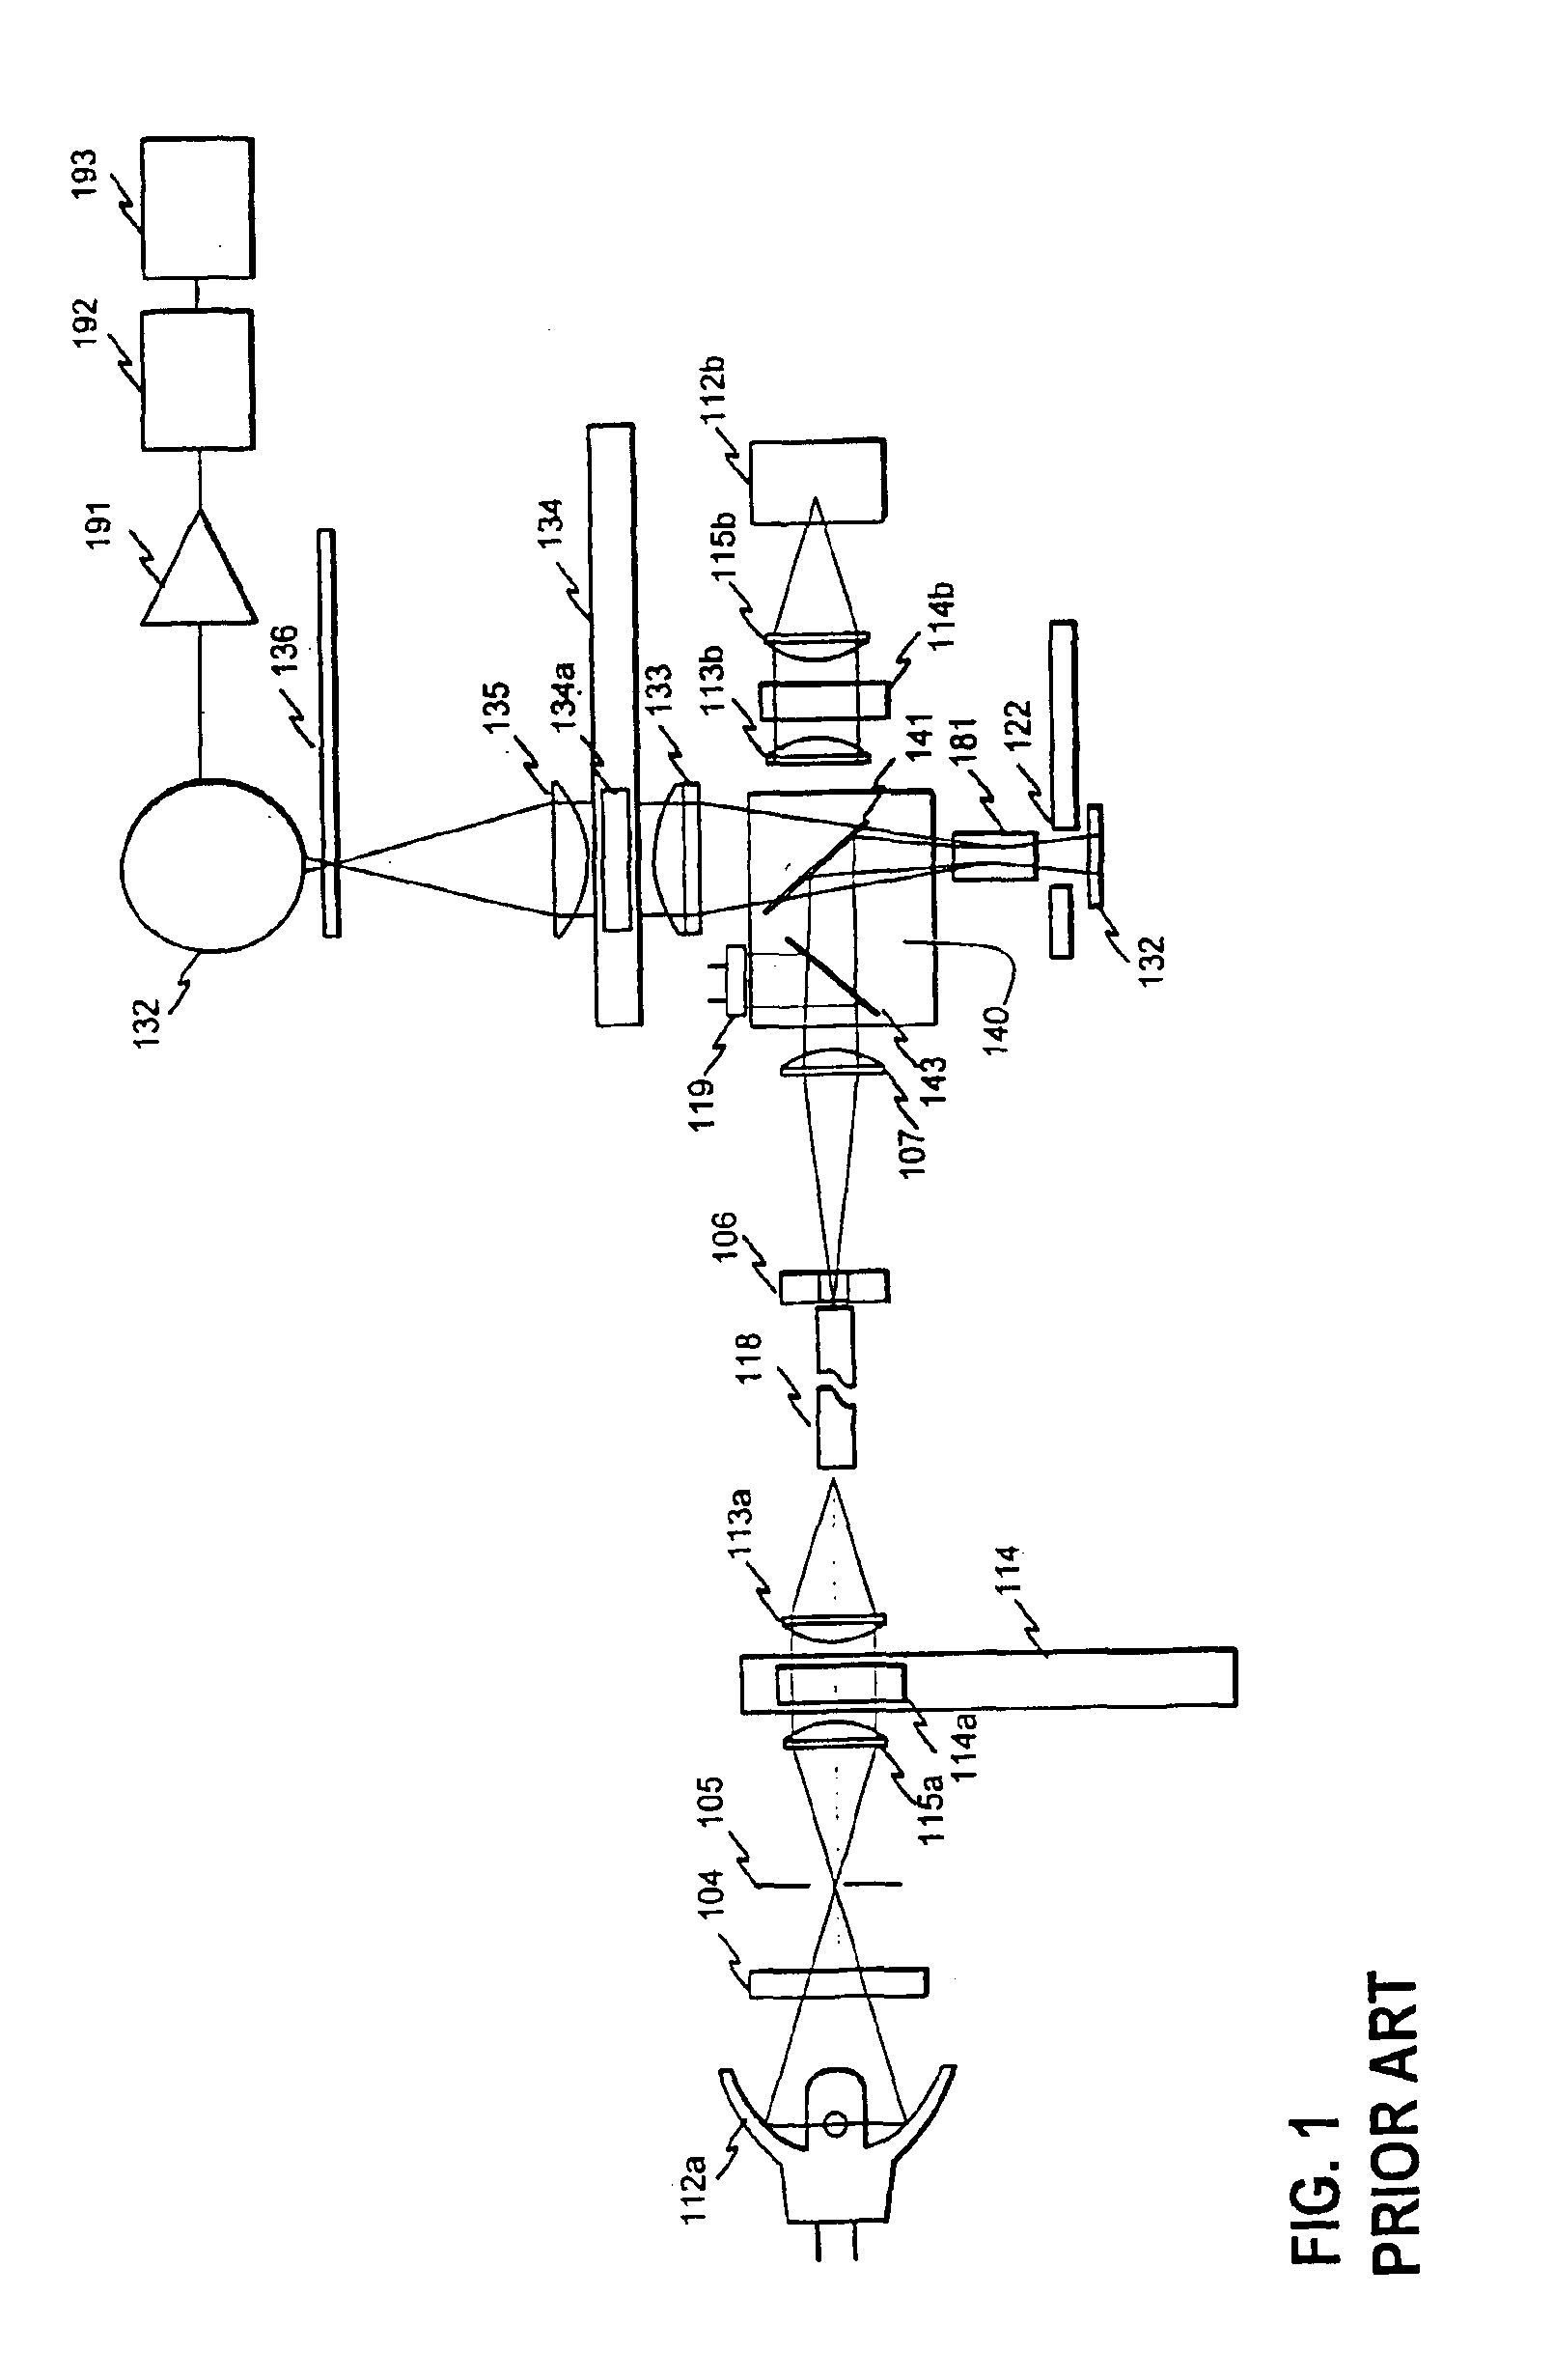 Optical instrument and process for measurement of samples